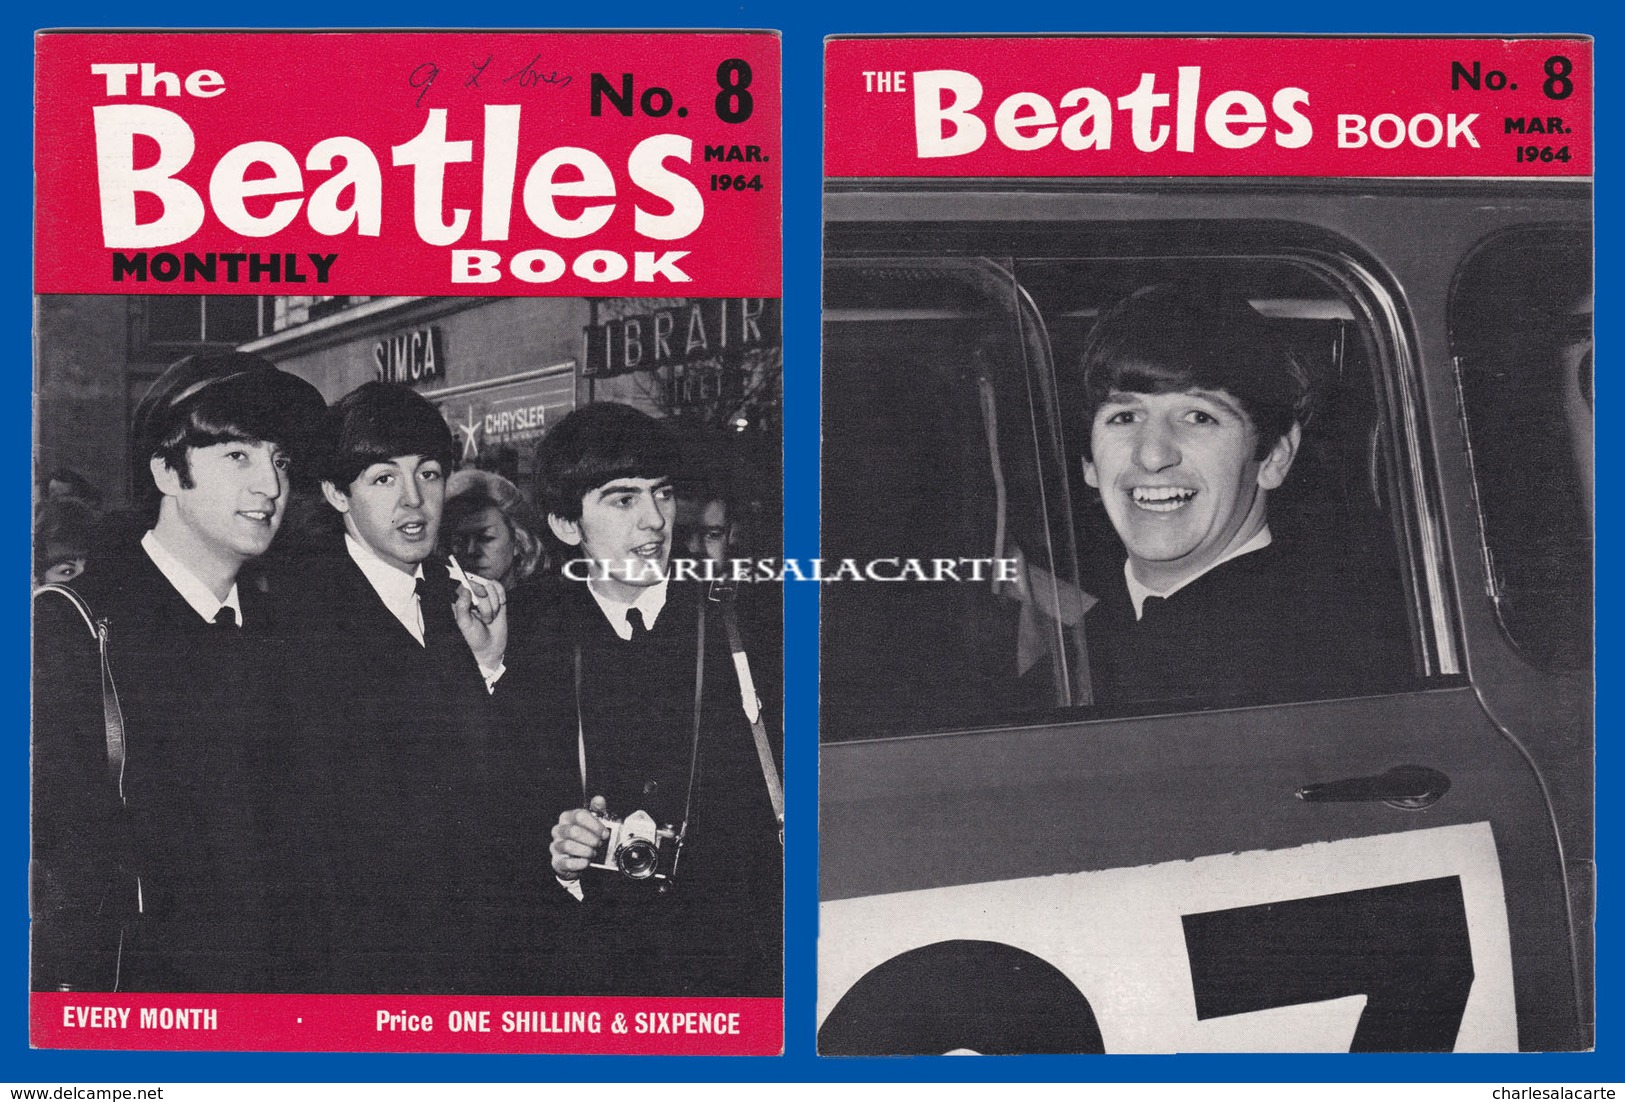 1964 MARCH THE BEATLES MONTHLY BOOK No.8 AUTHENTIC SUBERB CONDITION SEE THE SCAN - Unterhaltung